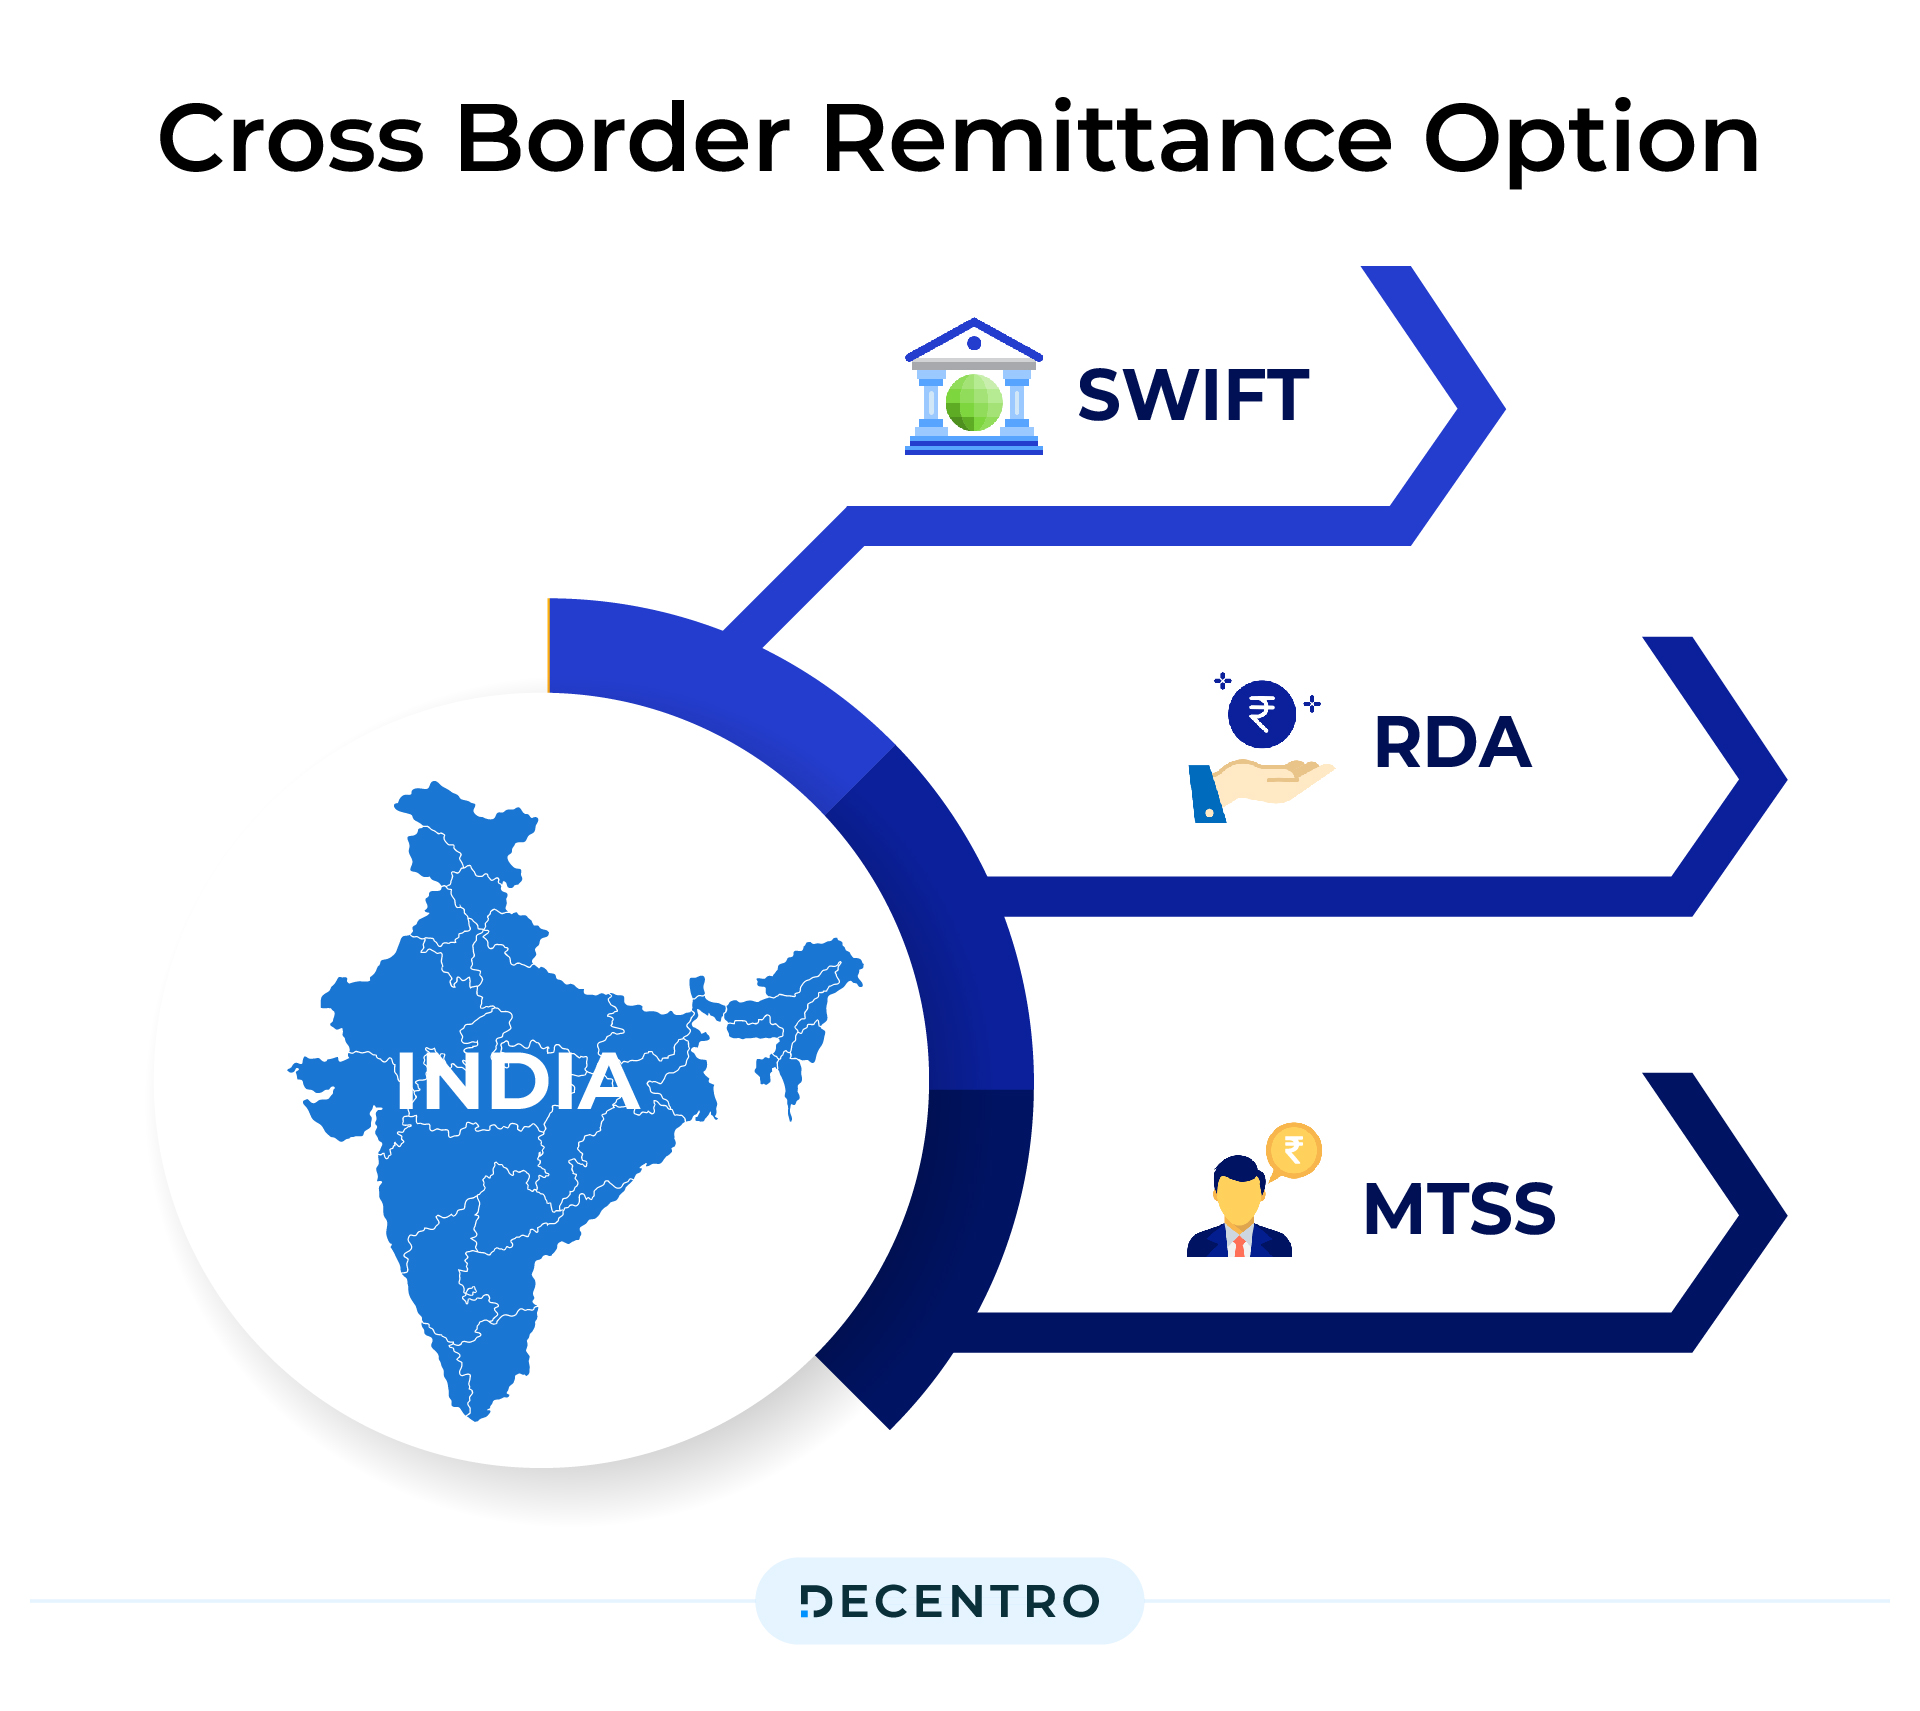 Cross-border remittance options for India